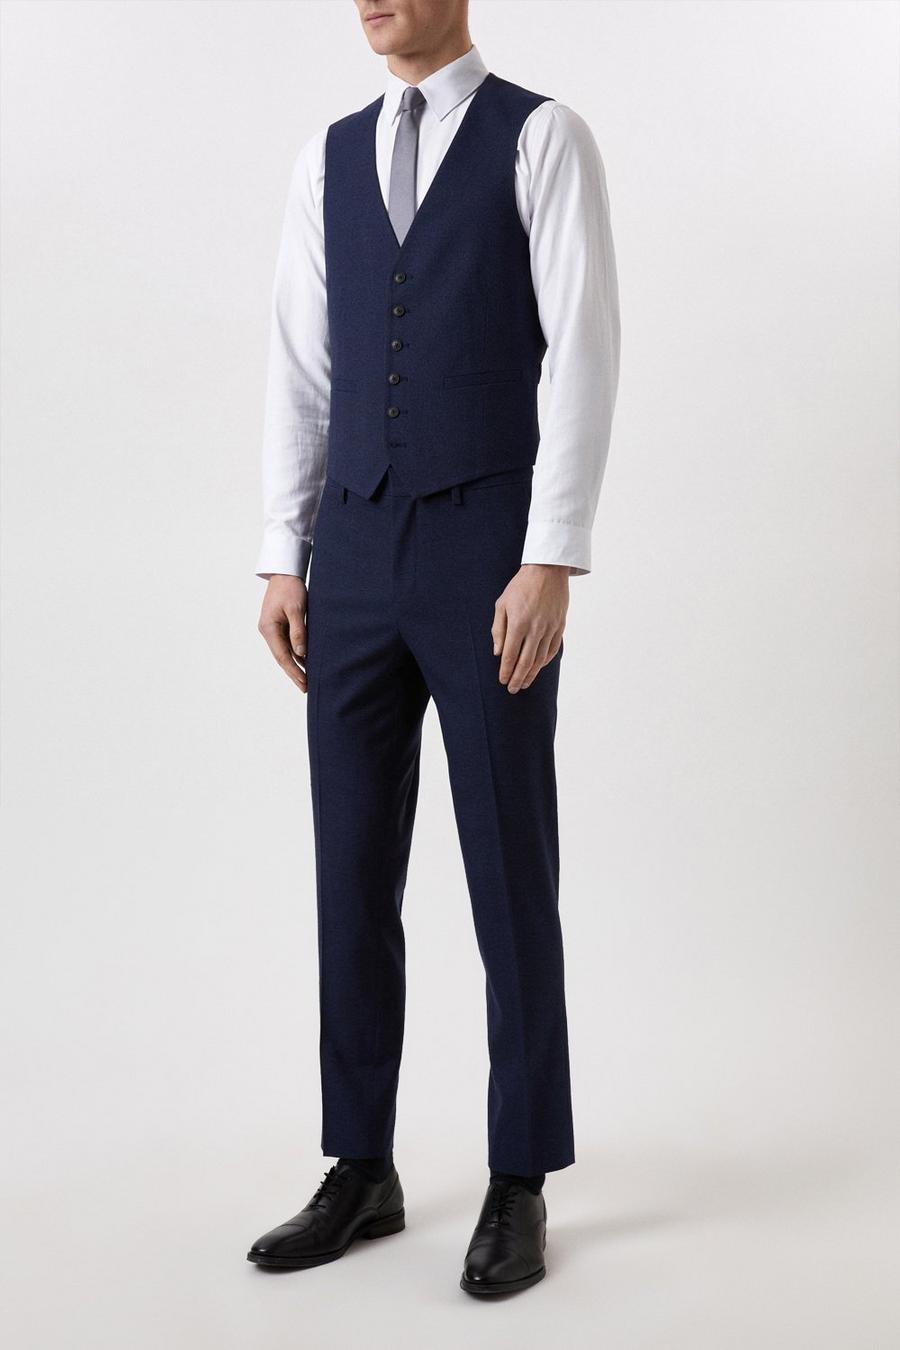 Plus And Tall Tailored Fit Navy Marl Suit Waistcoat